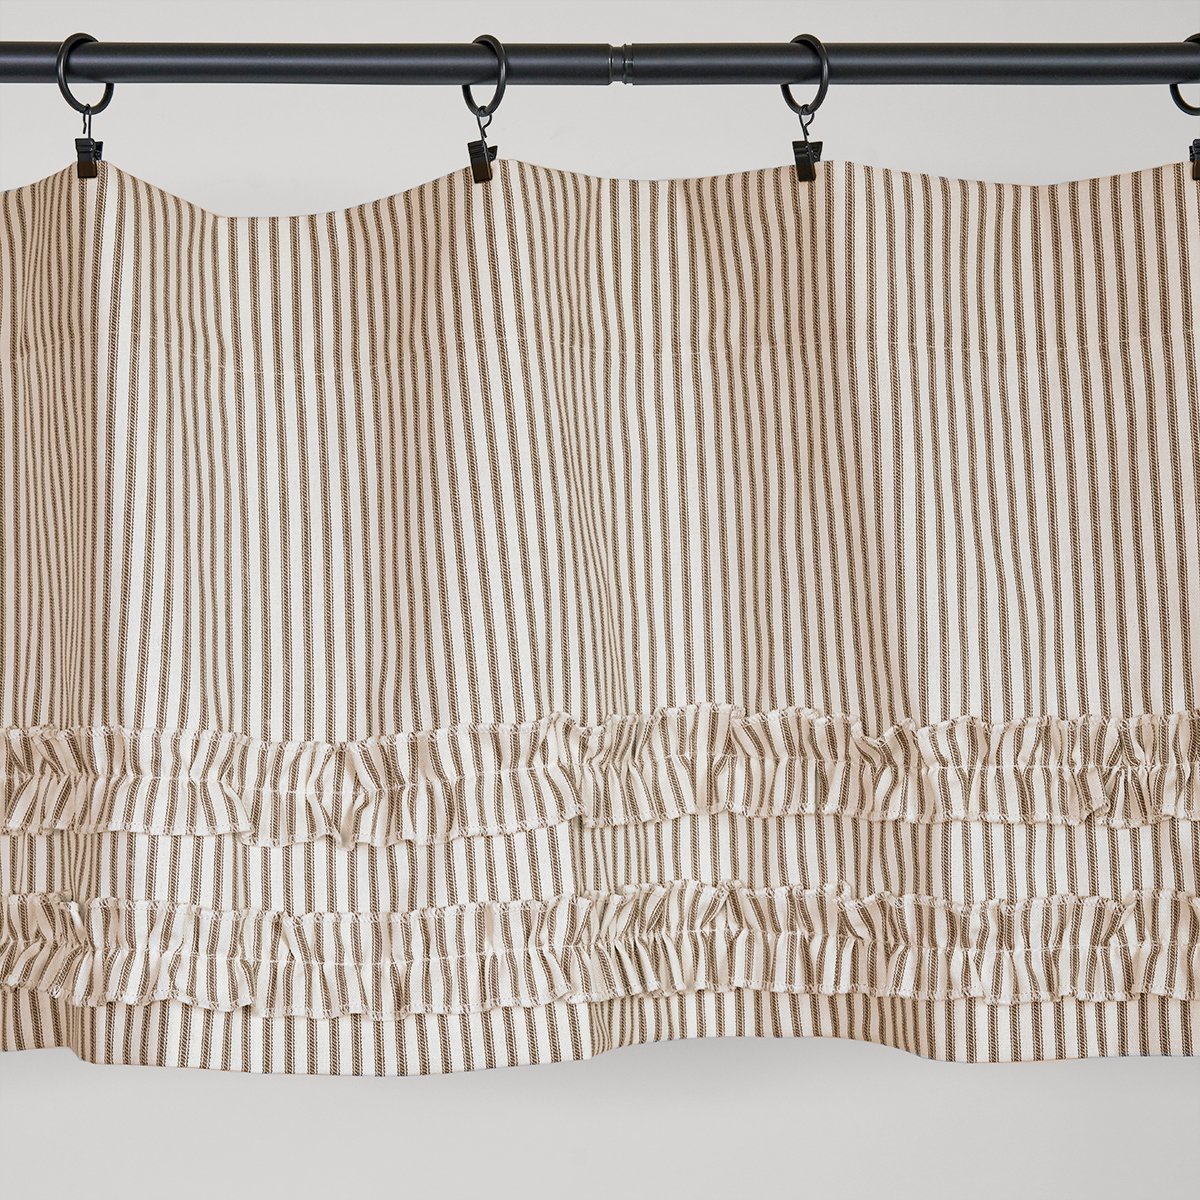 Ticking Stripe Valance Brown With Ruffles